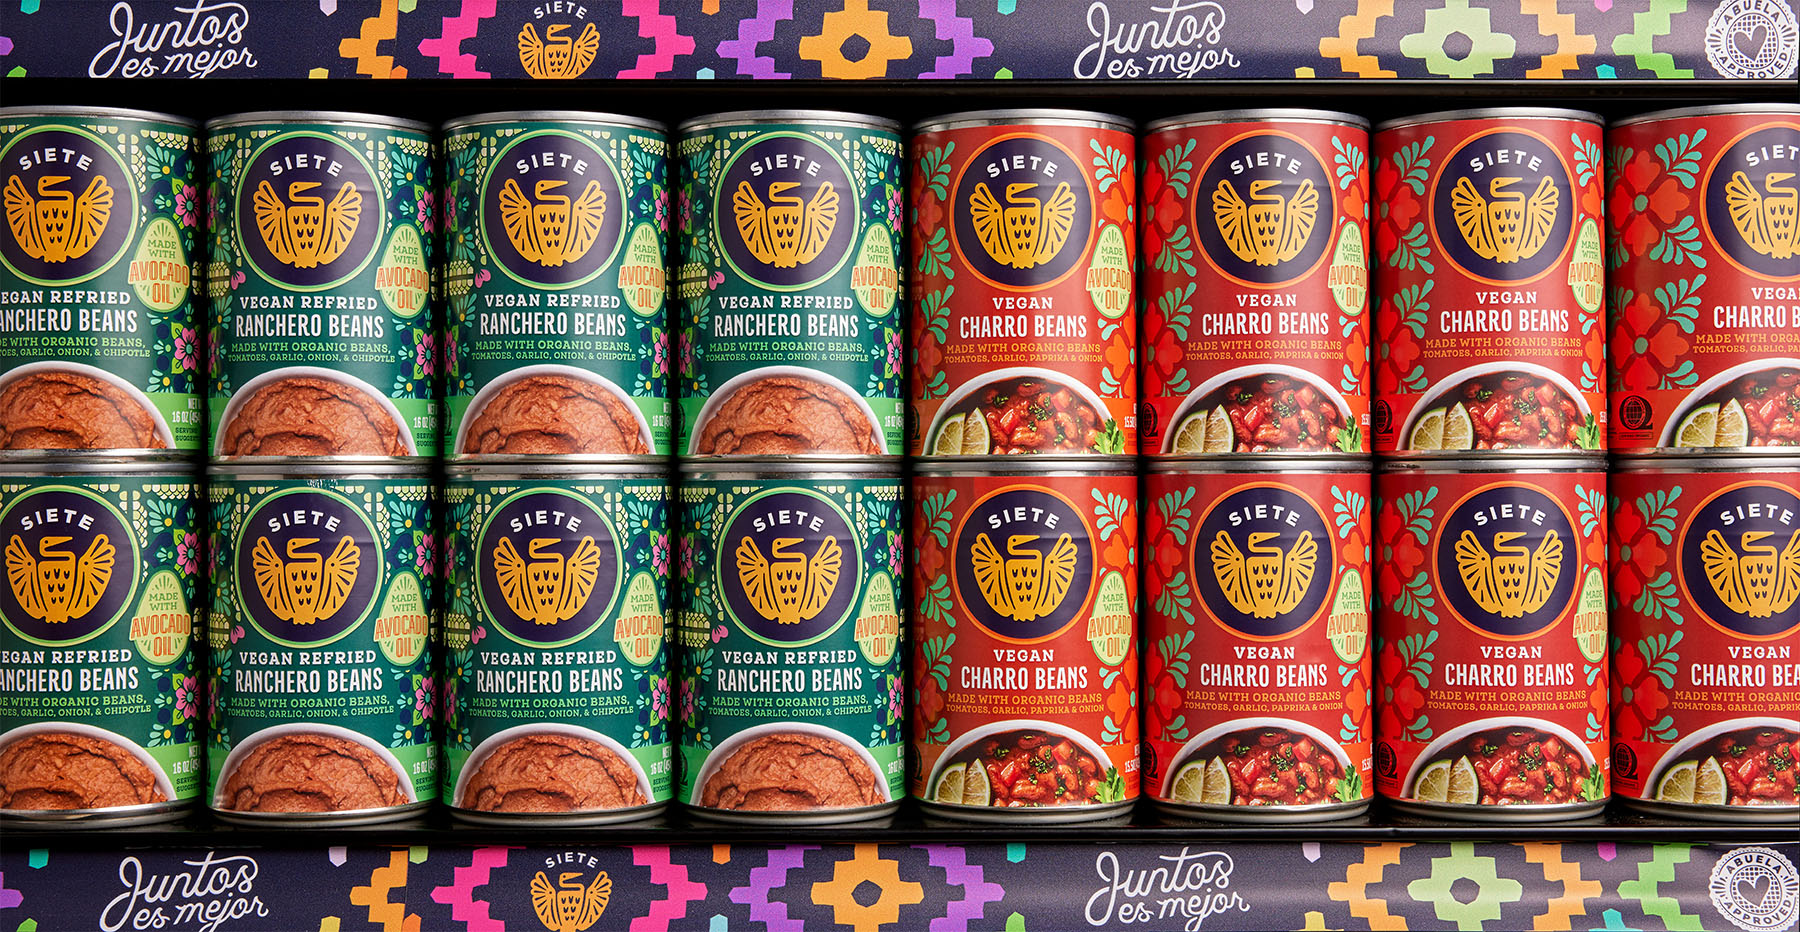 Introducing Our New Beans: Charro Beans and Refried Ranchero Beans!